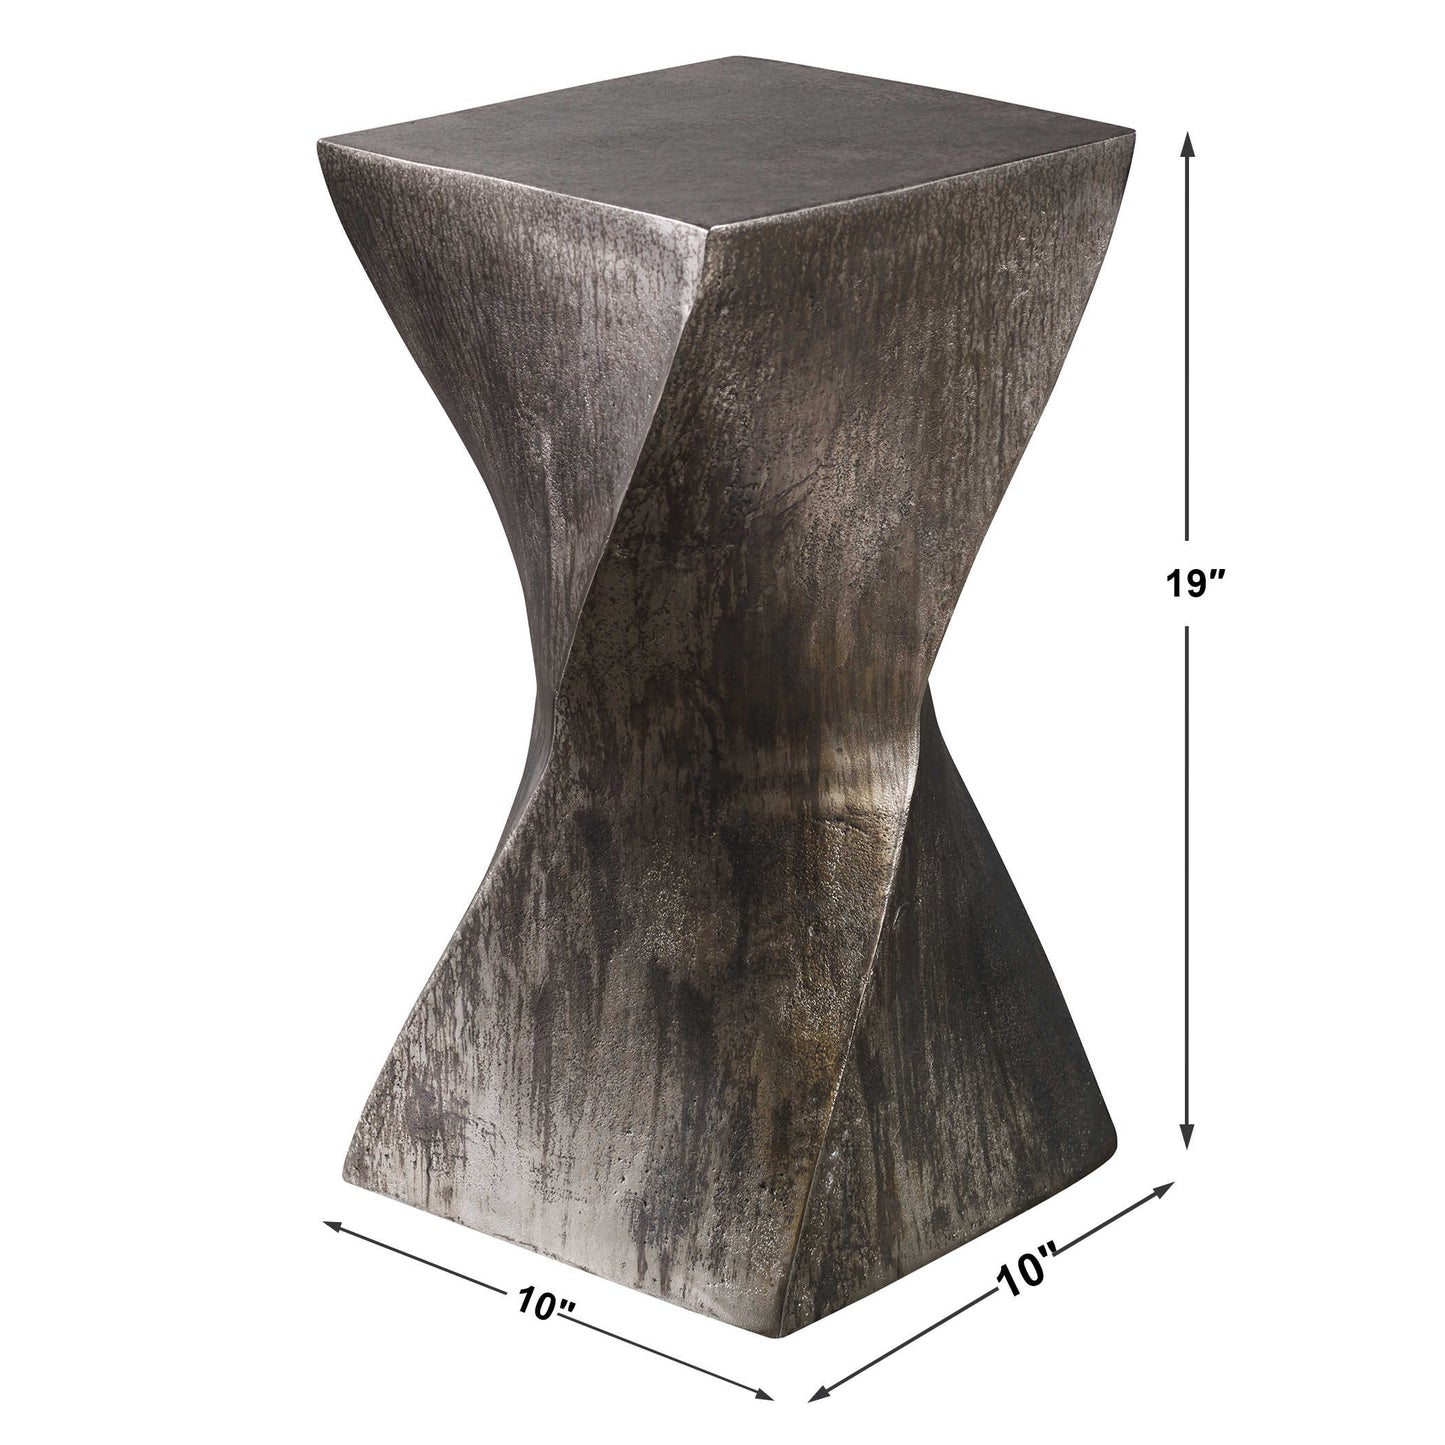 Dimensions listed for the silver accent table.